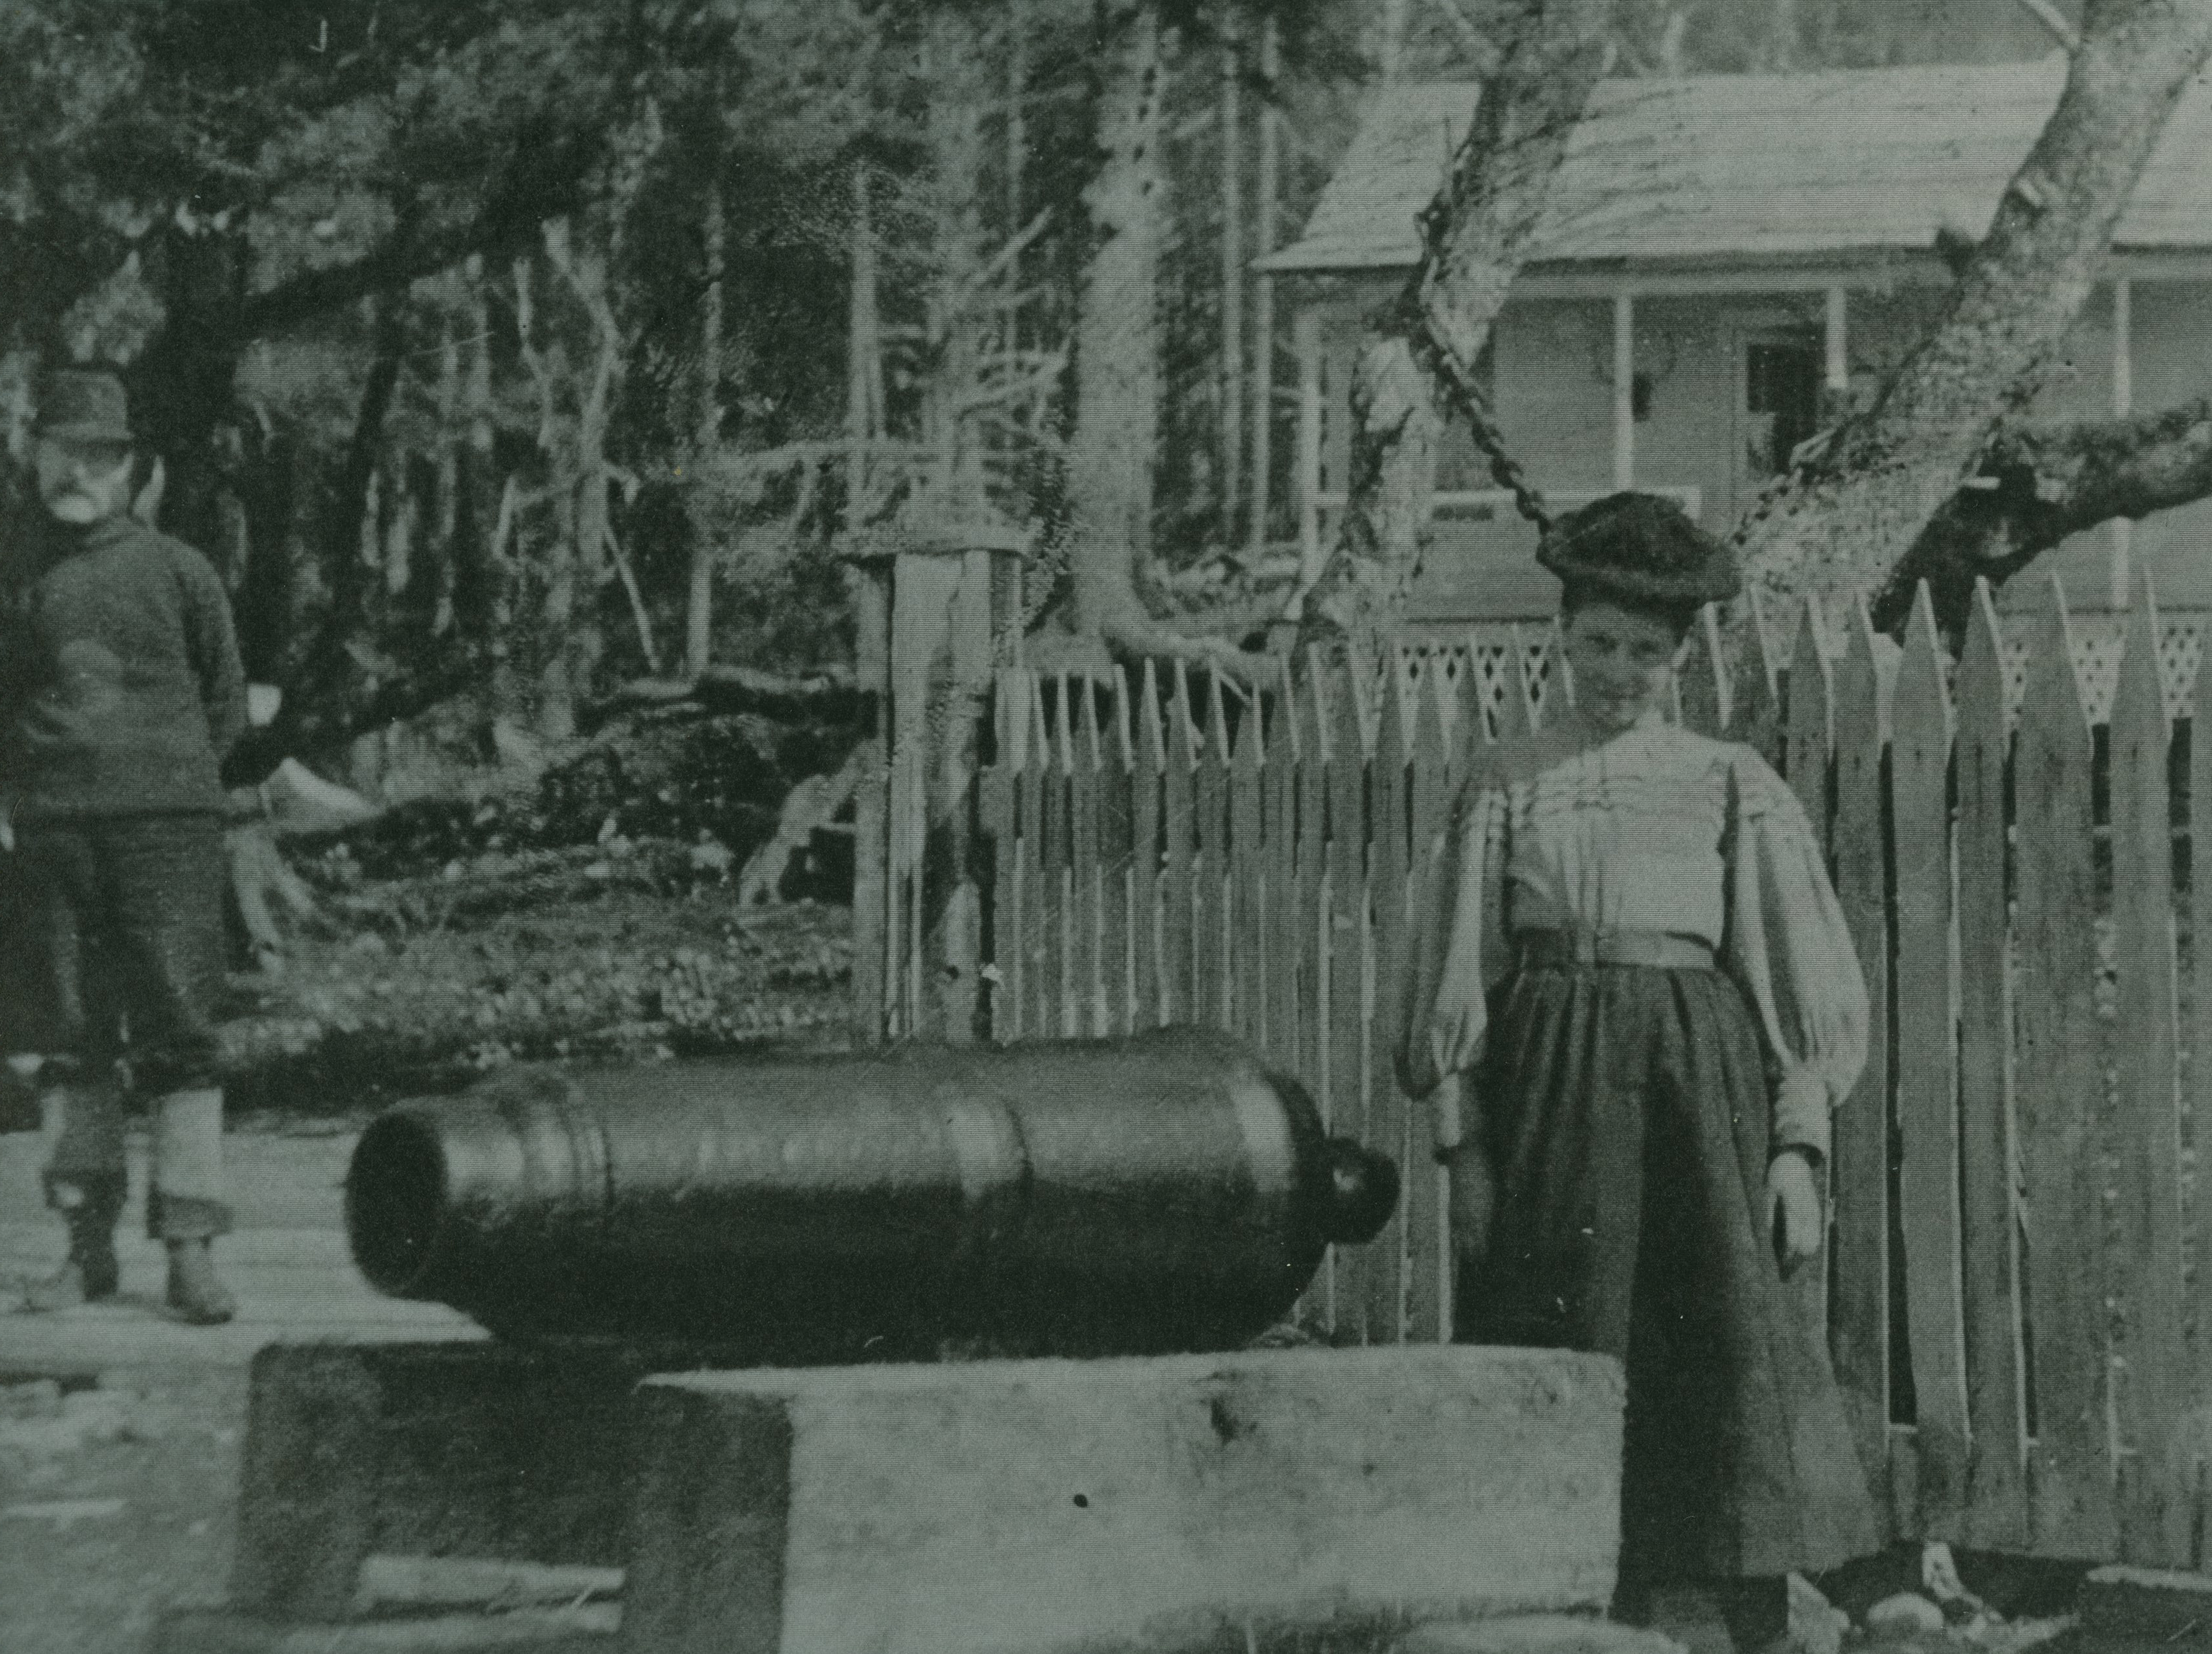 Austin's wife and the original cannon that Cannon Beach was named for, circa 1898 - 1900.